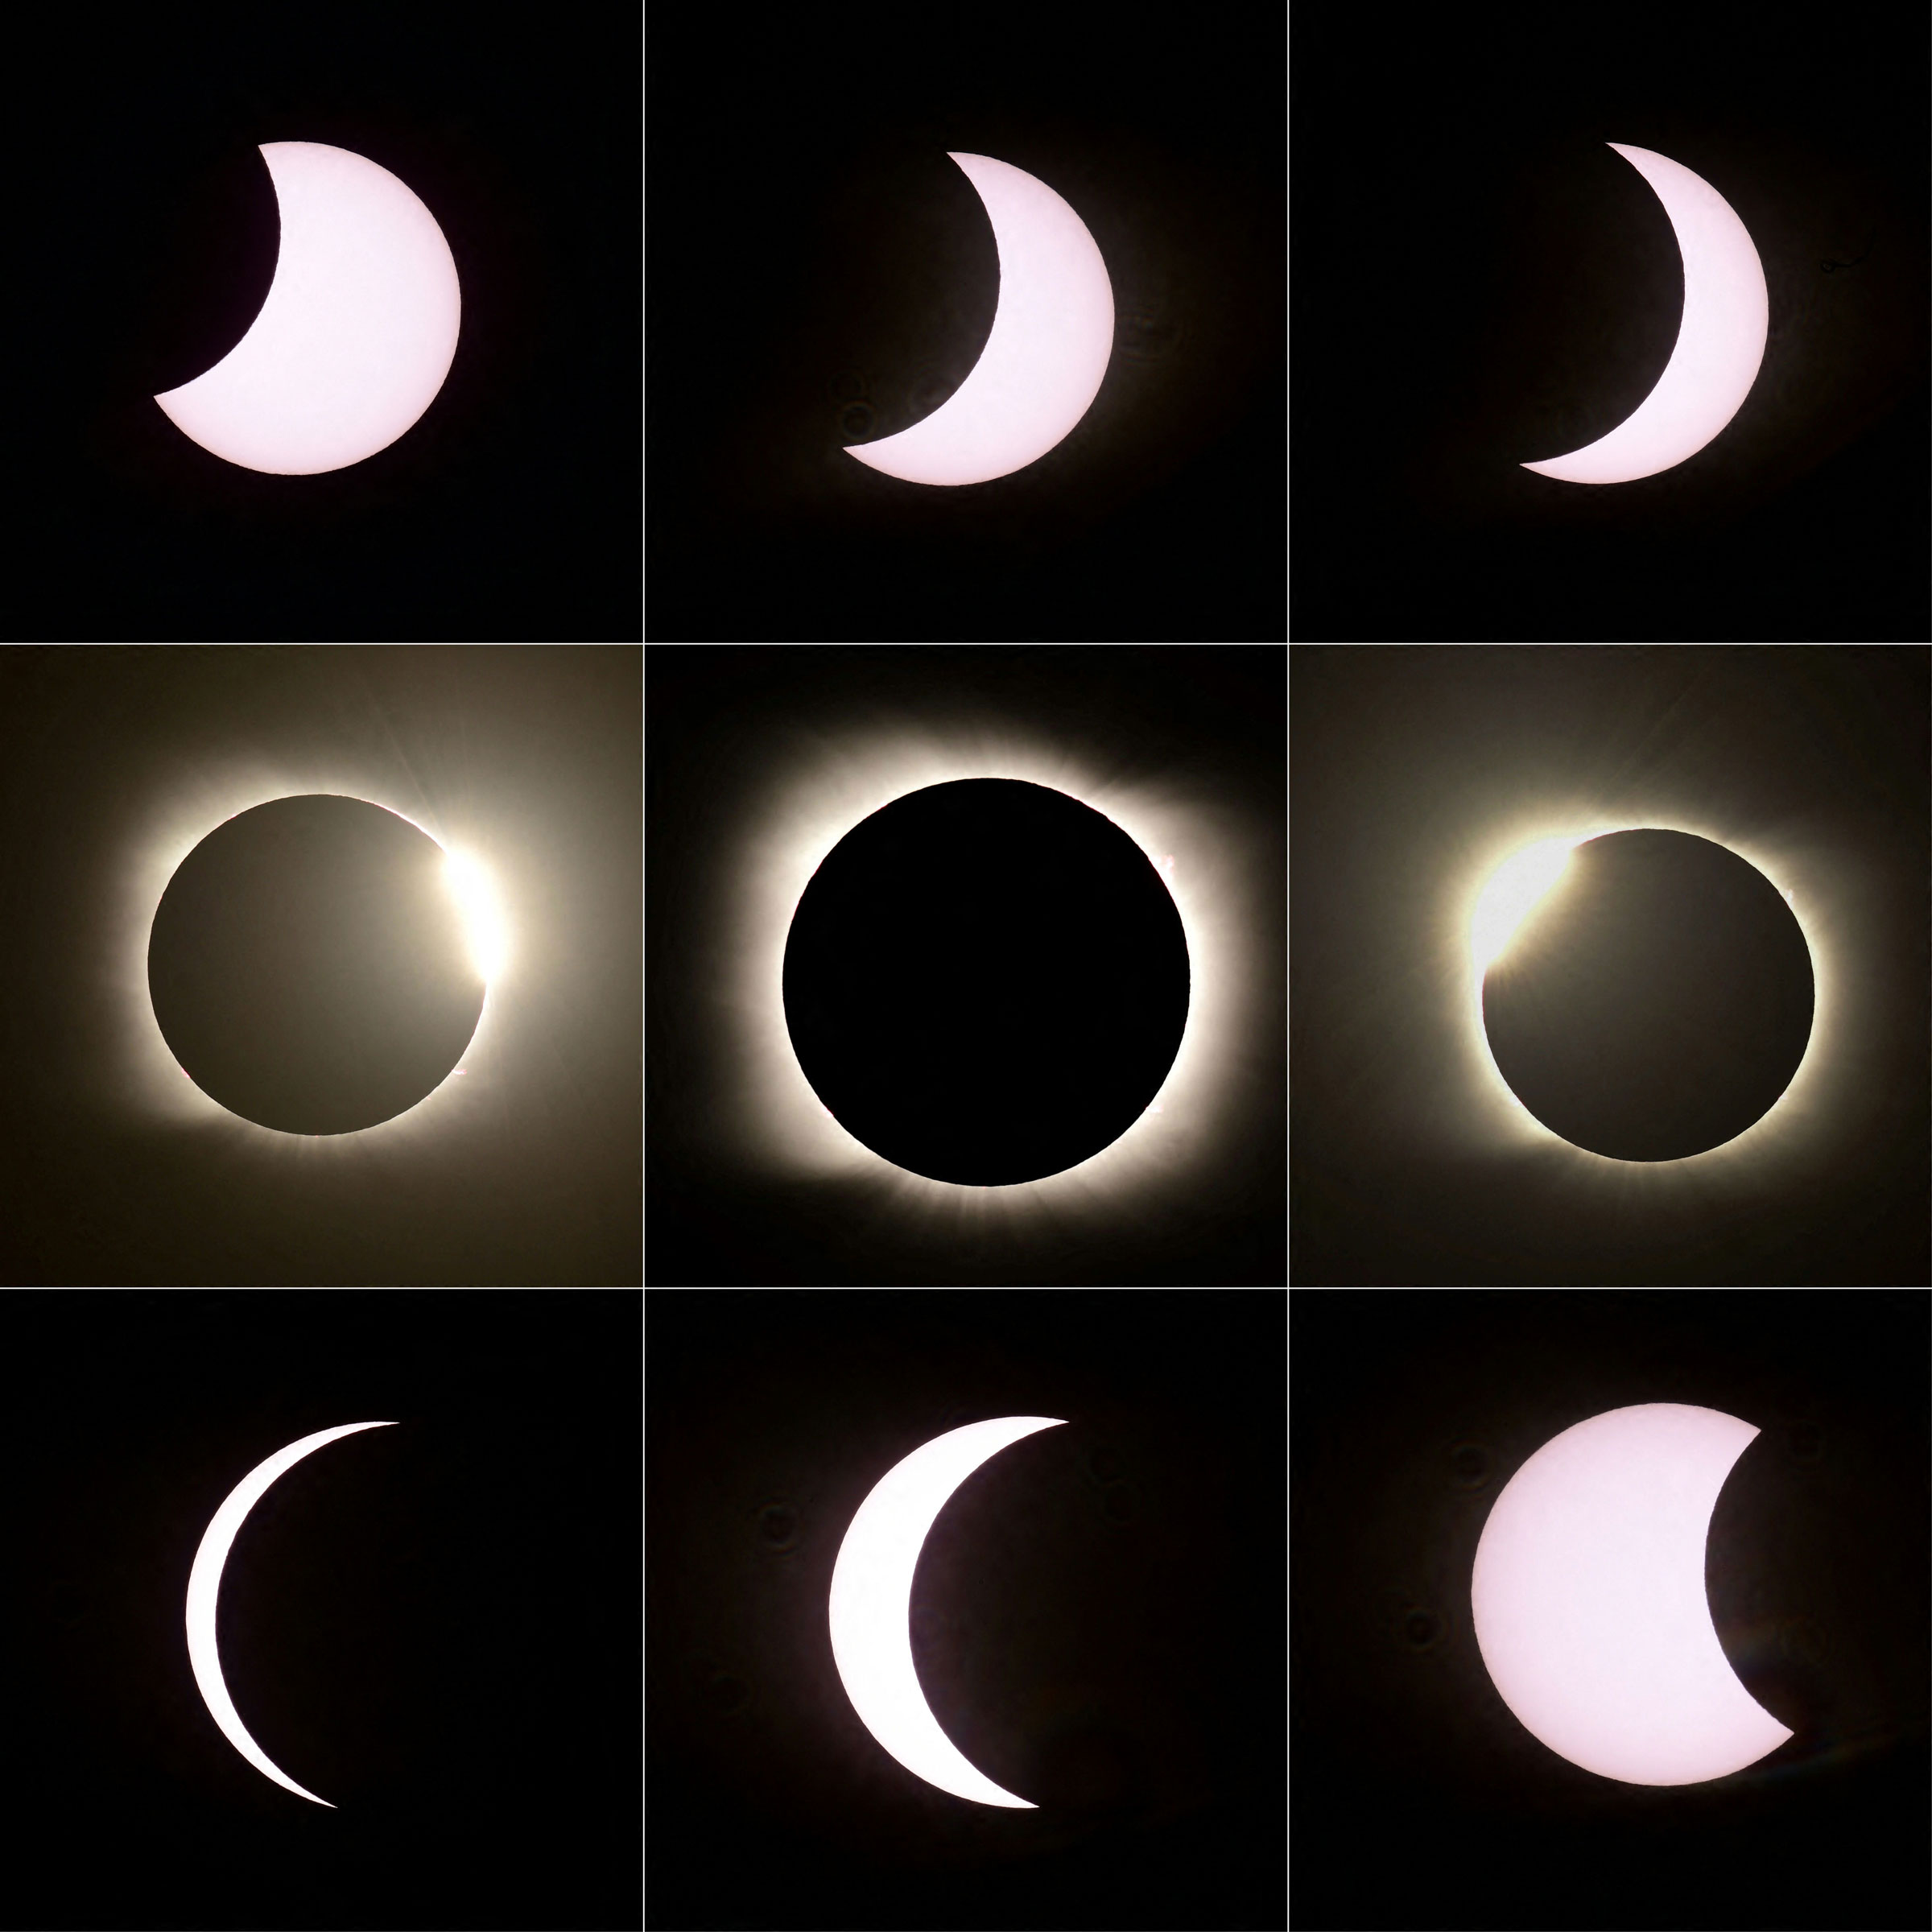 a combination of pictures created on December 14, 2020 showing the different stages of the total solar eclipse